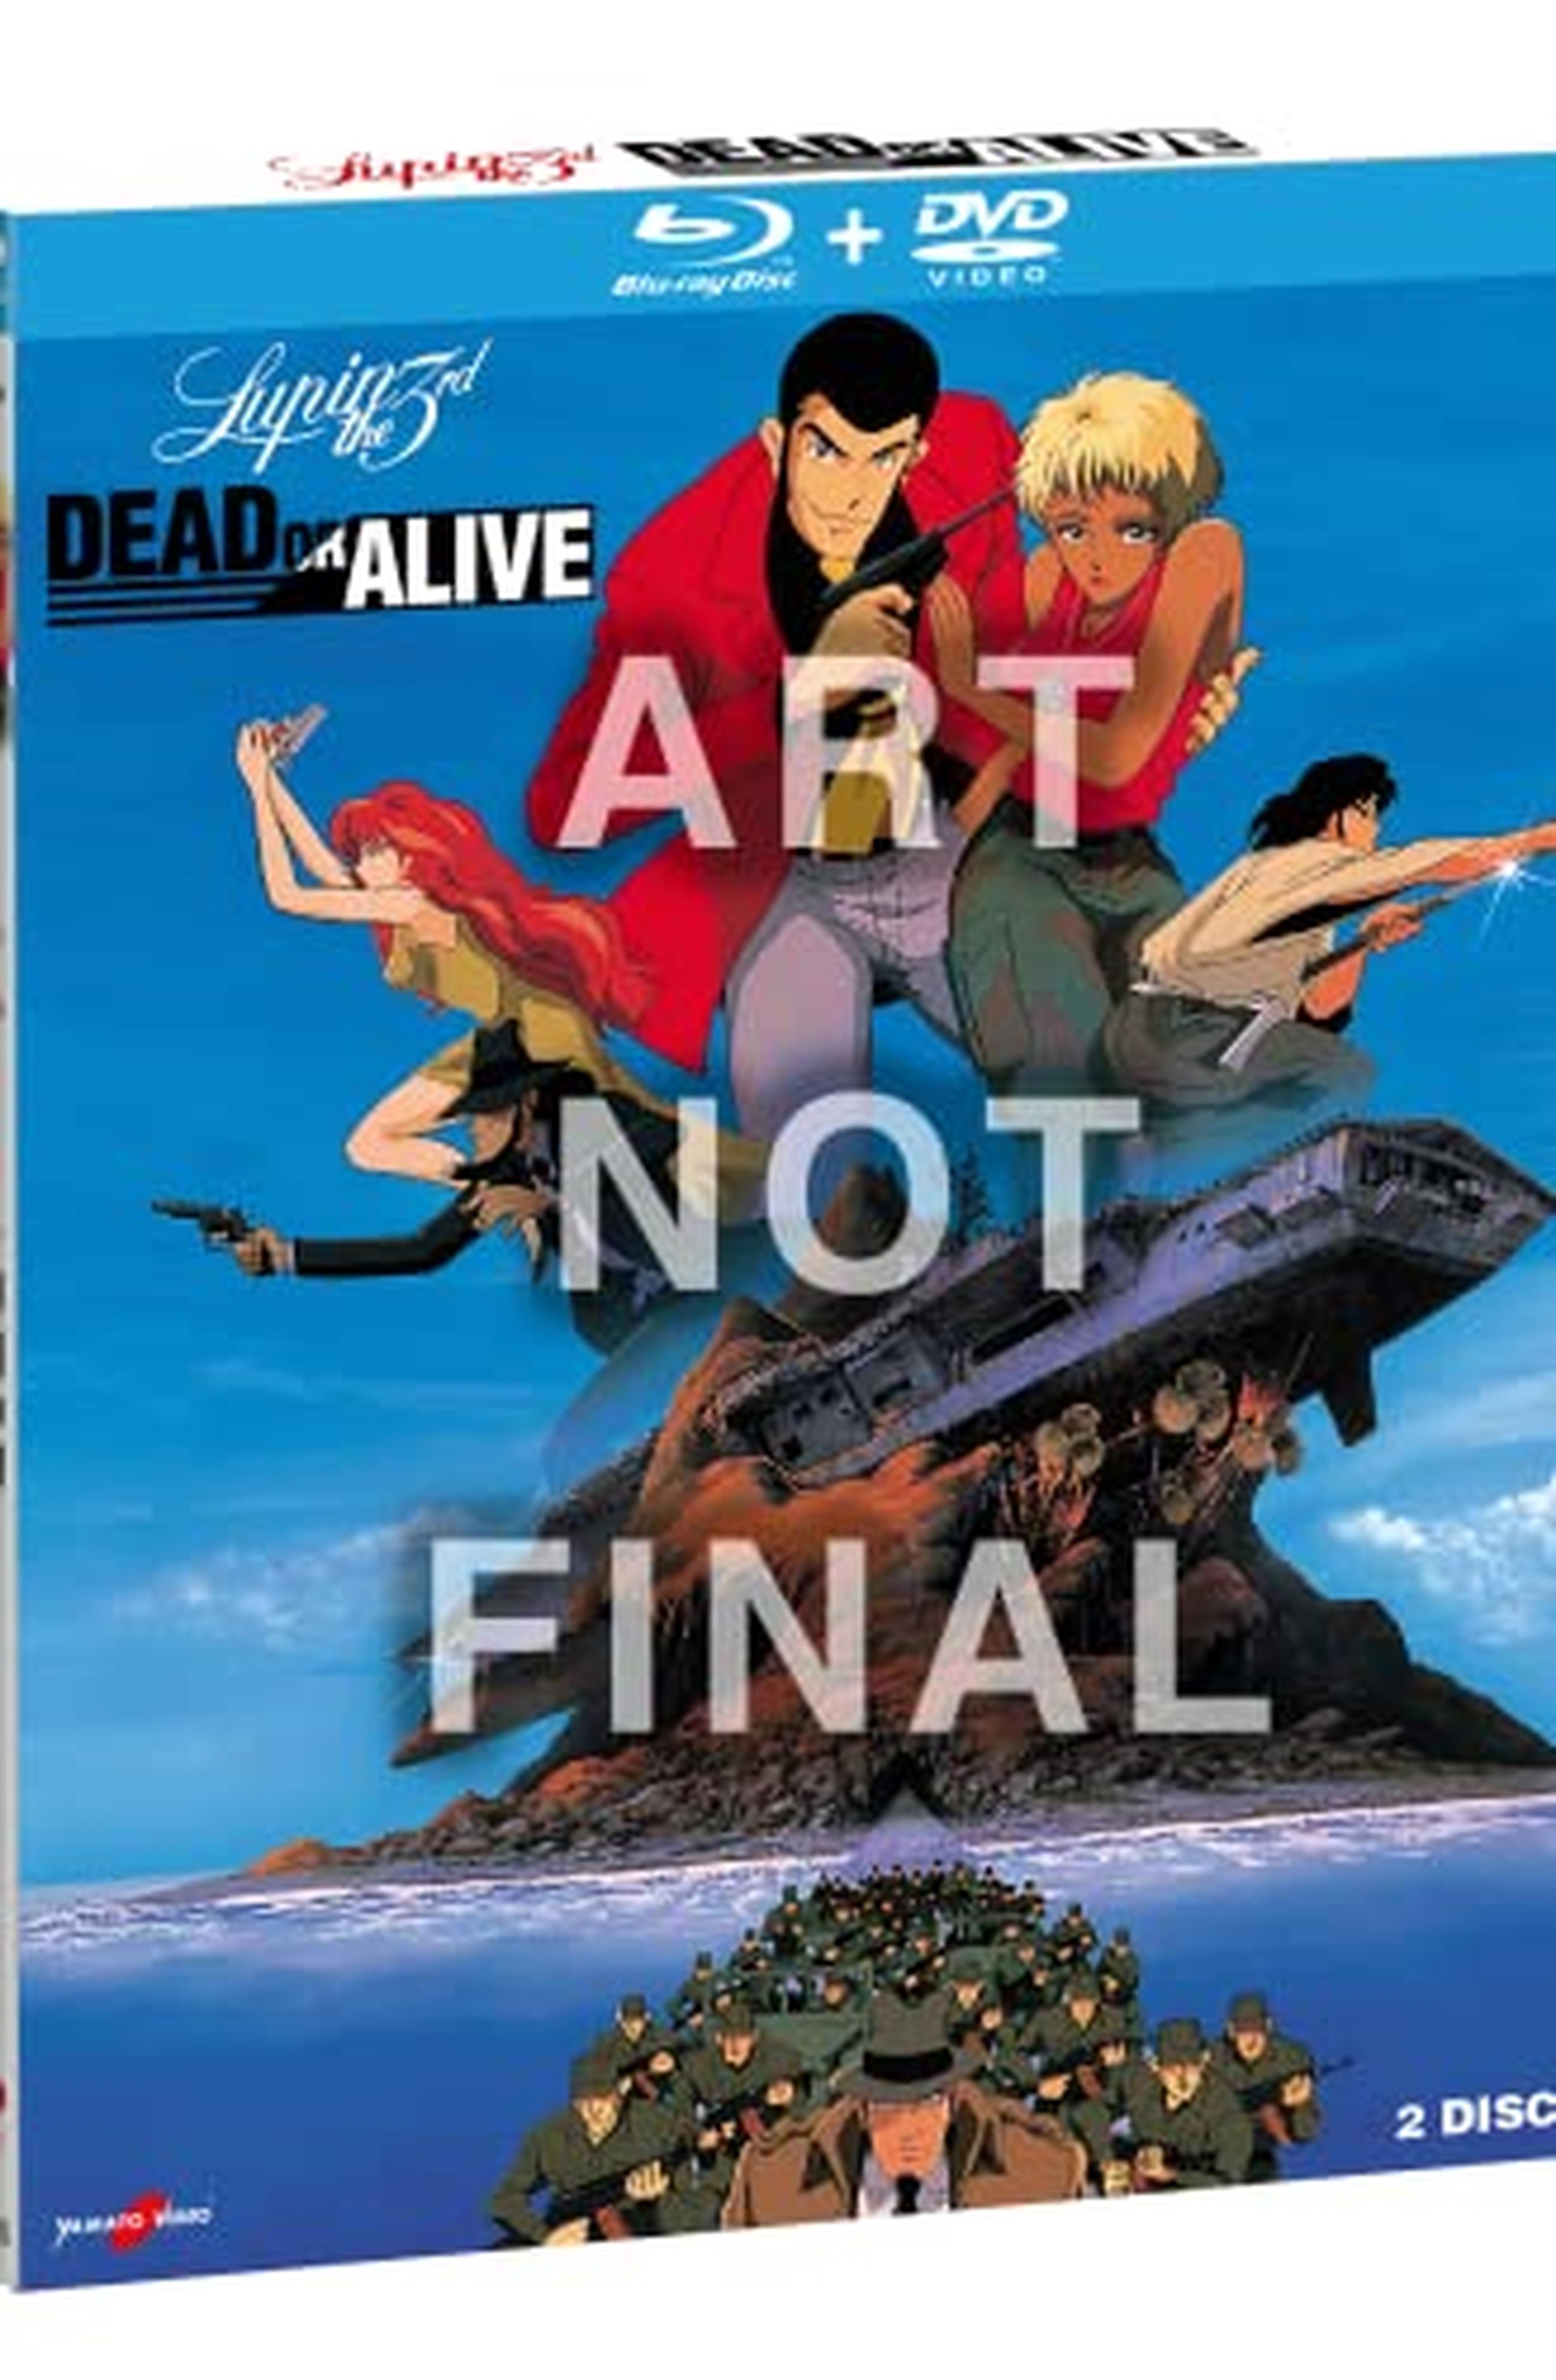 Lupin III - Dead Or Alive - Combo (Bd + Dvd) + Booklet